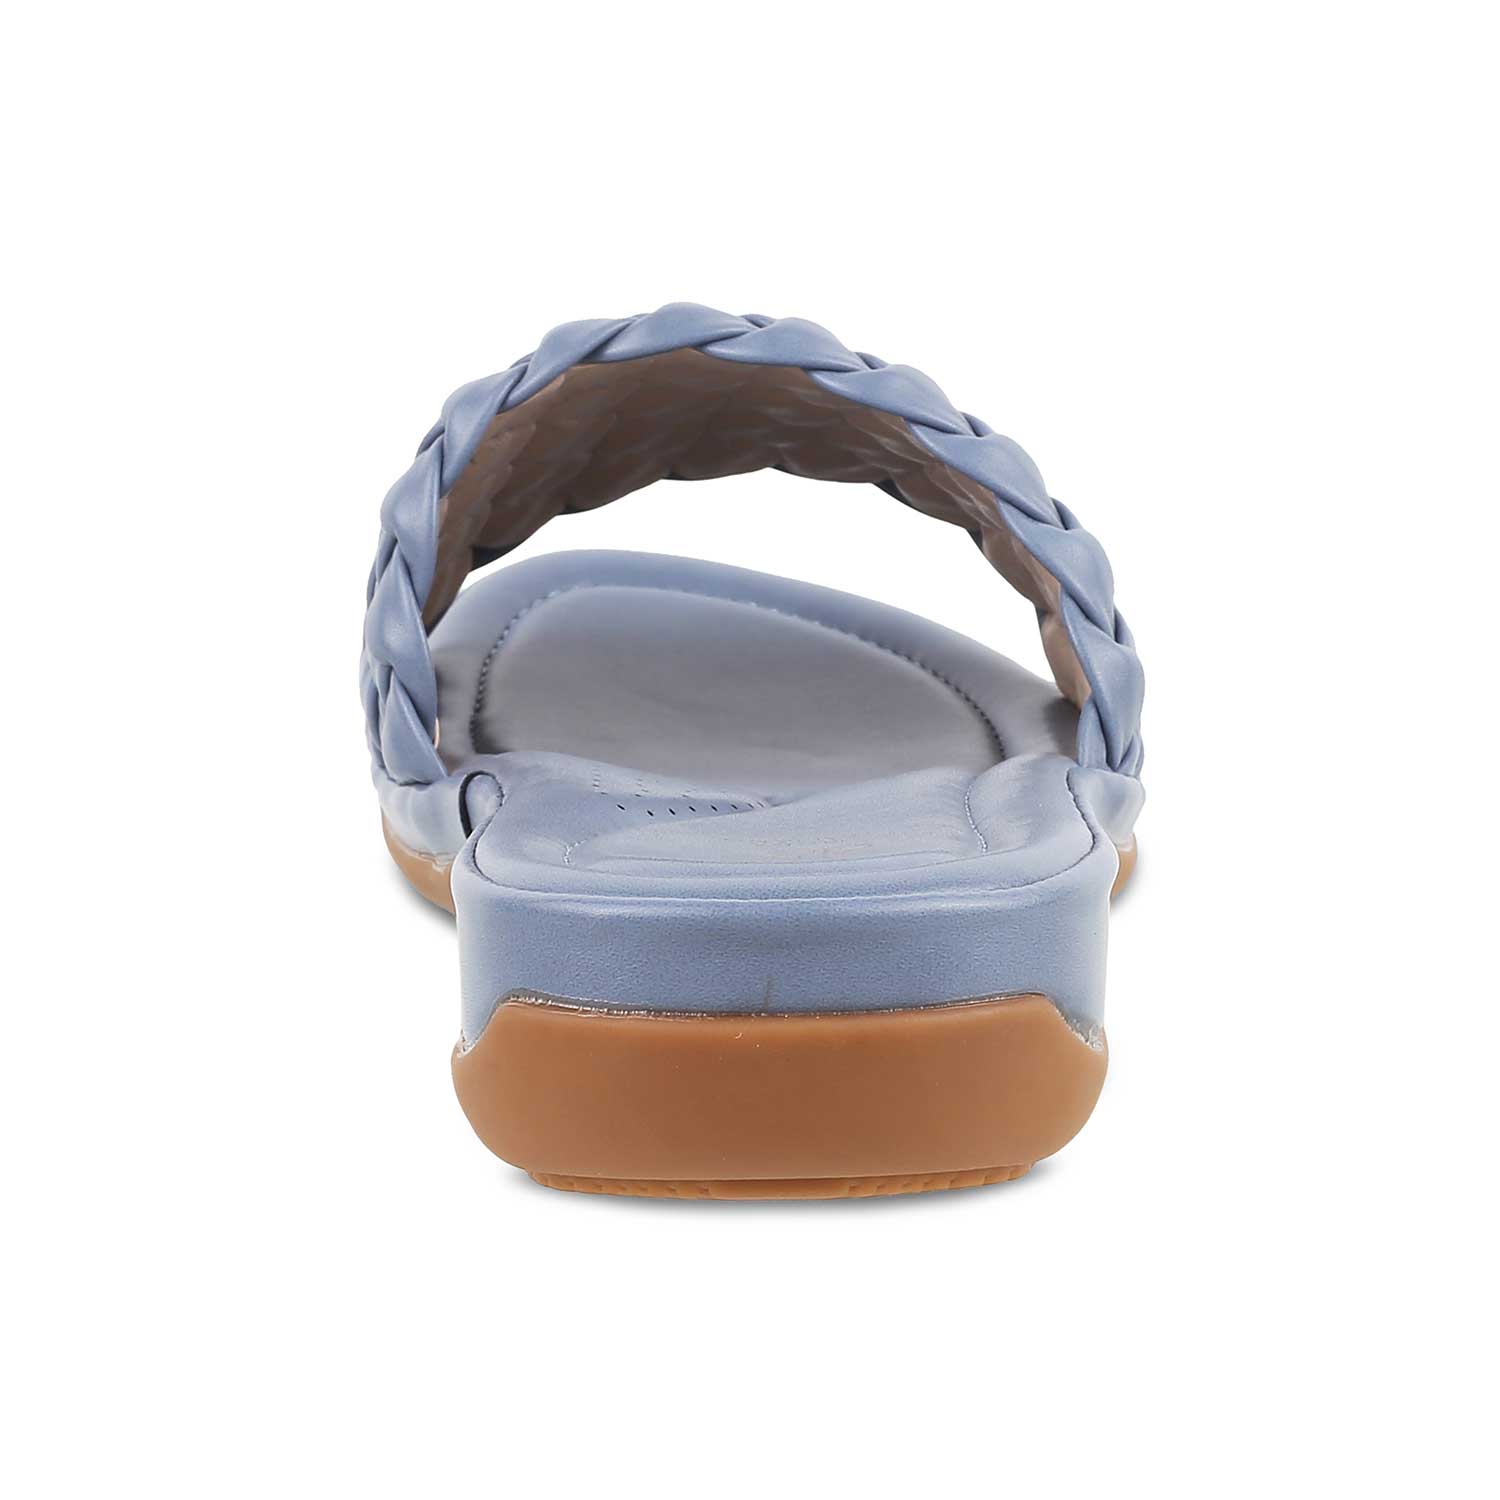 Tresmode-The Kosice-New Blue Women's Casual Flats Tresmode-Tresmode